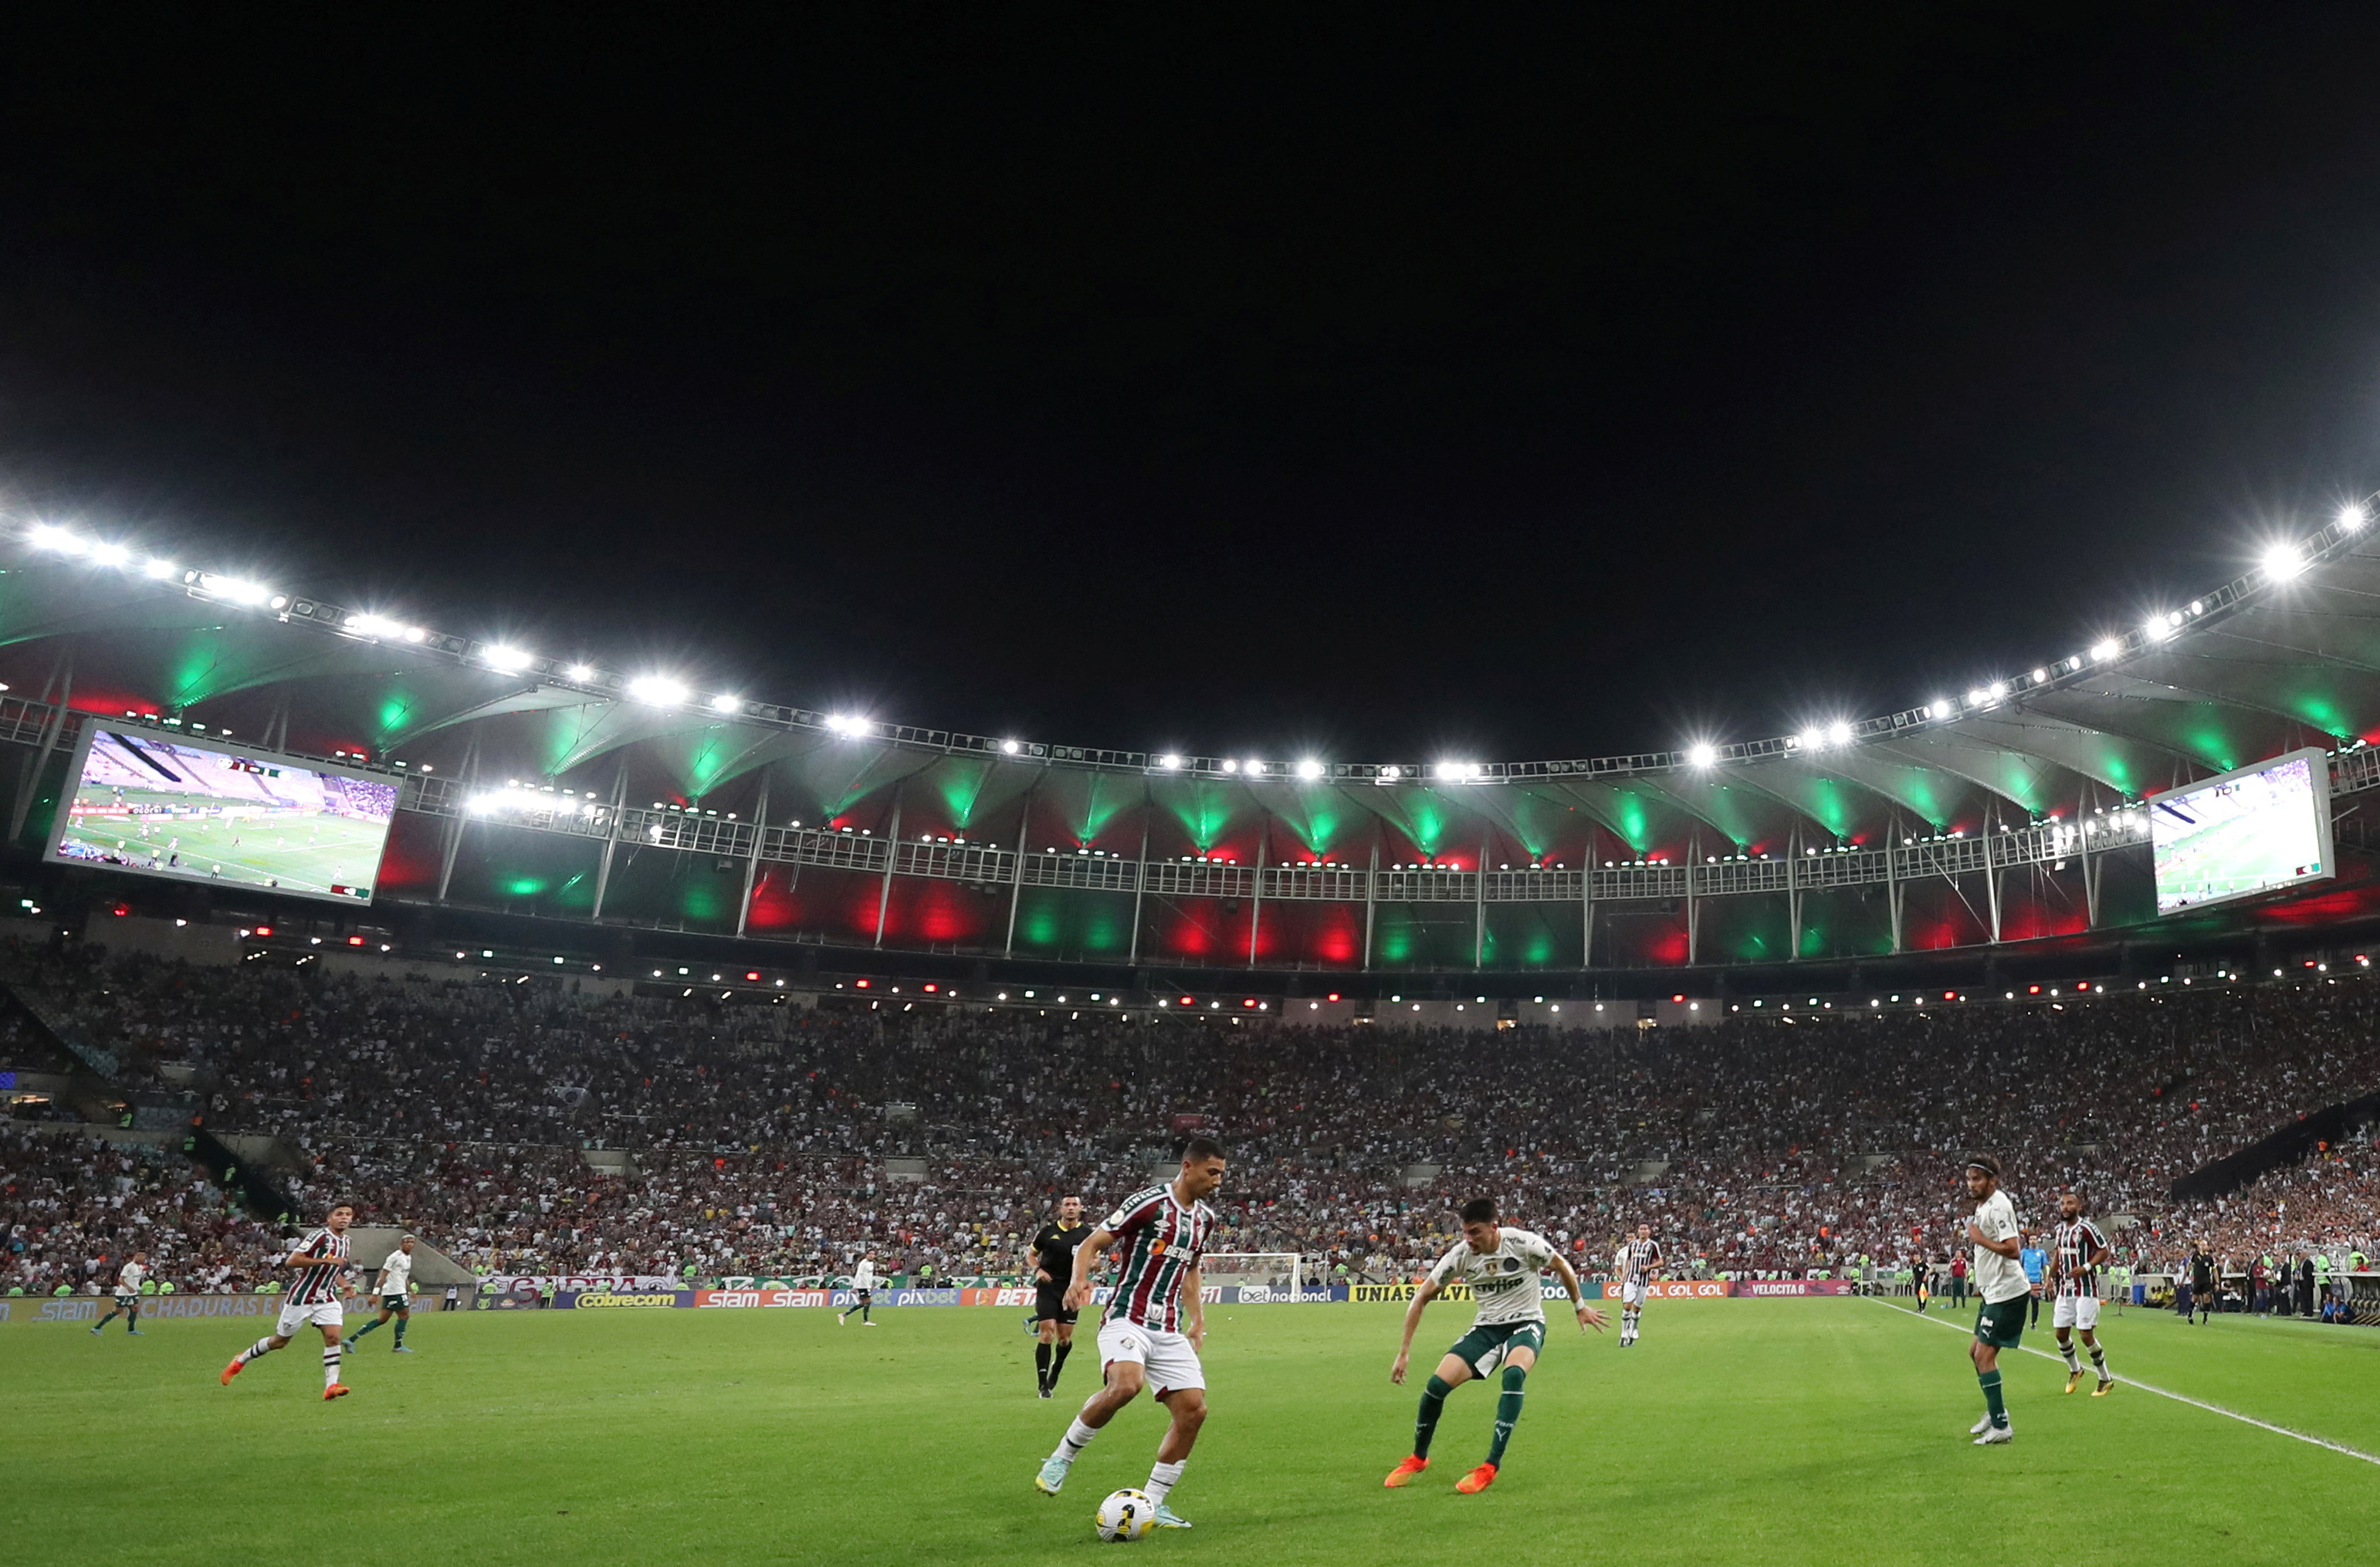 Brazilian football pays penalty as clubs resist reform